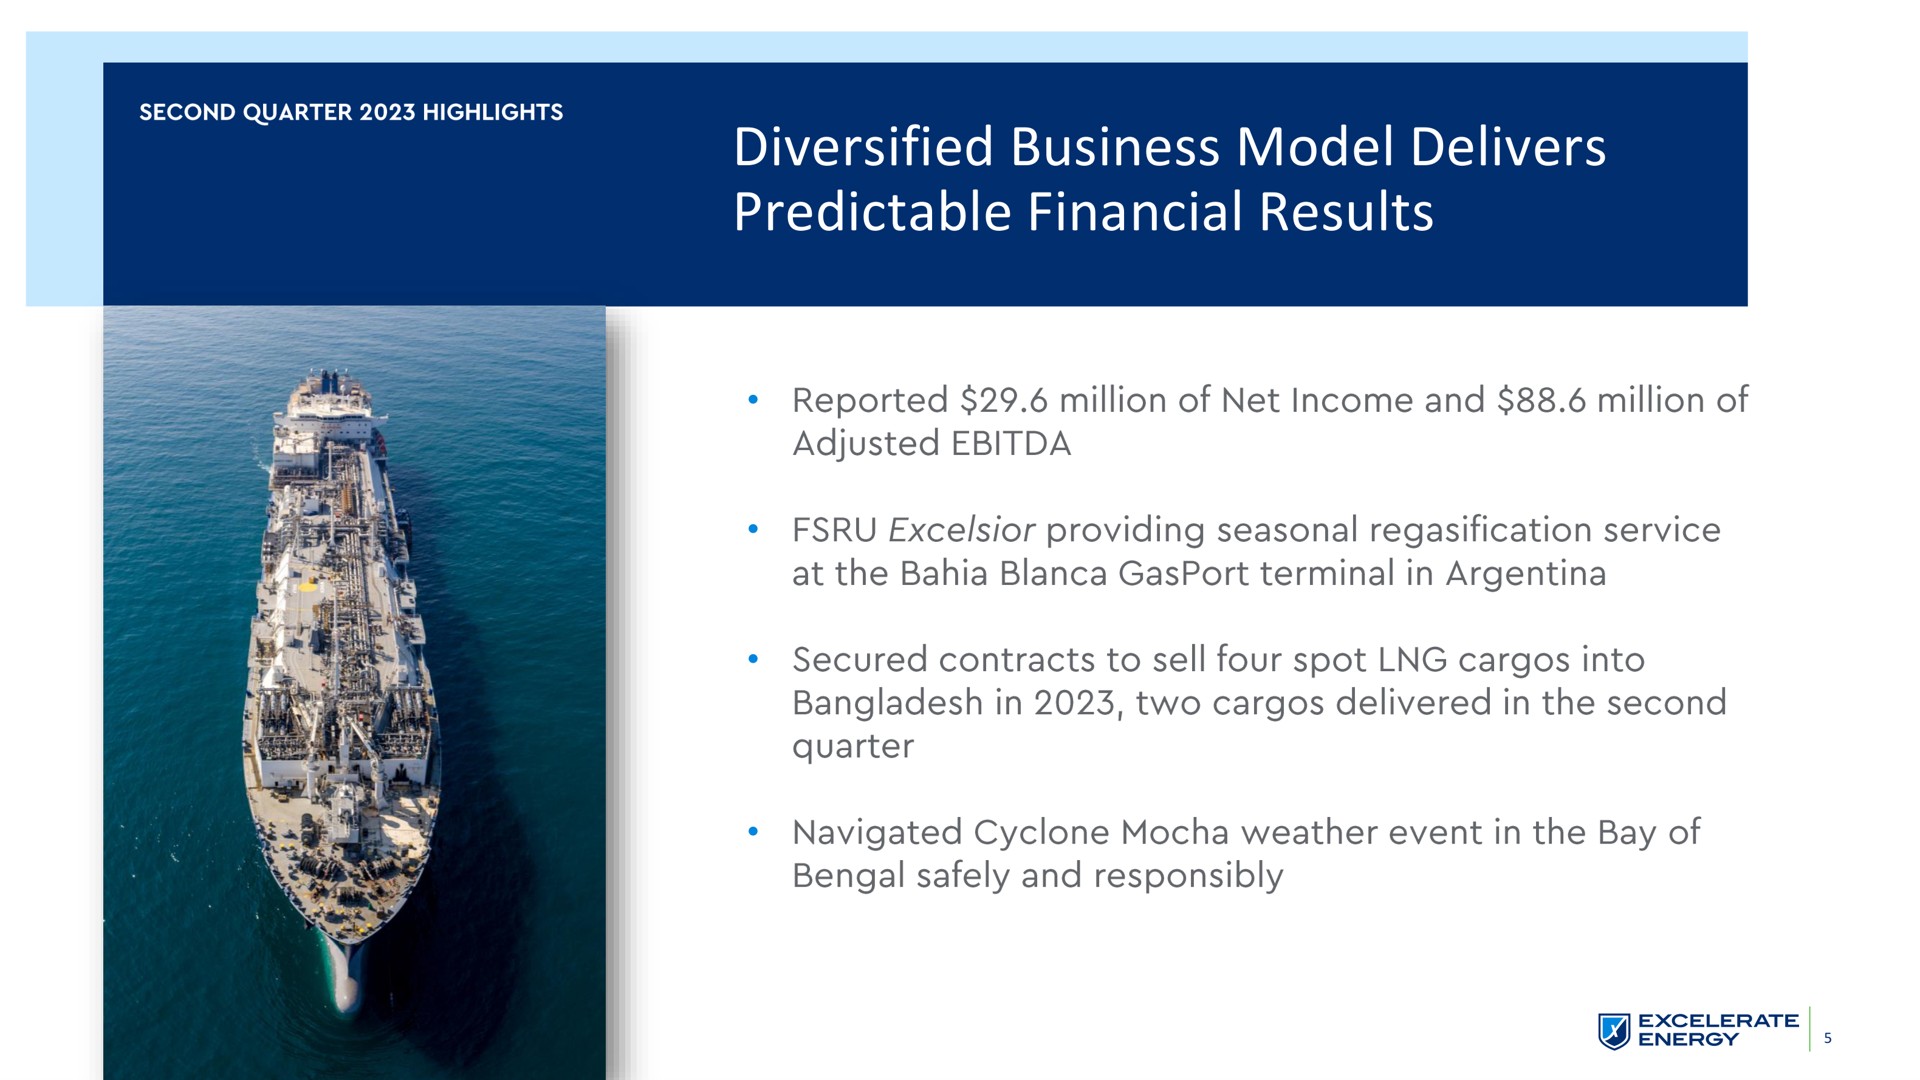 diversified business model delivers predictable financial results | Excelerate Energy